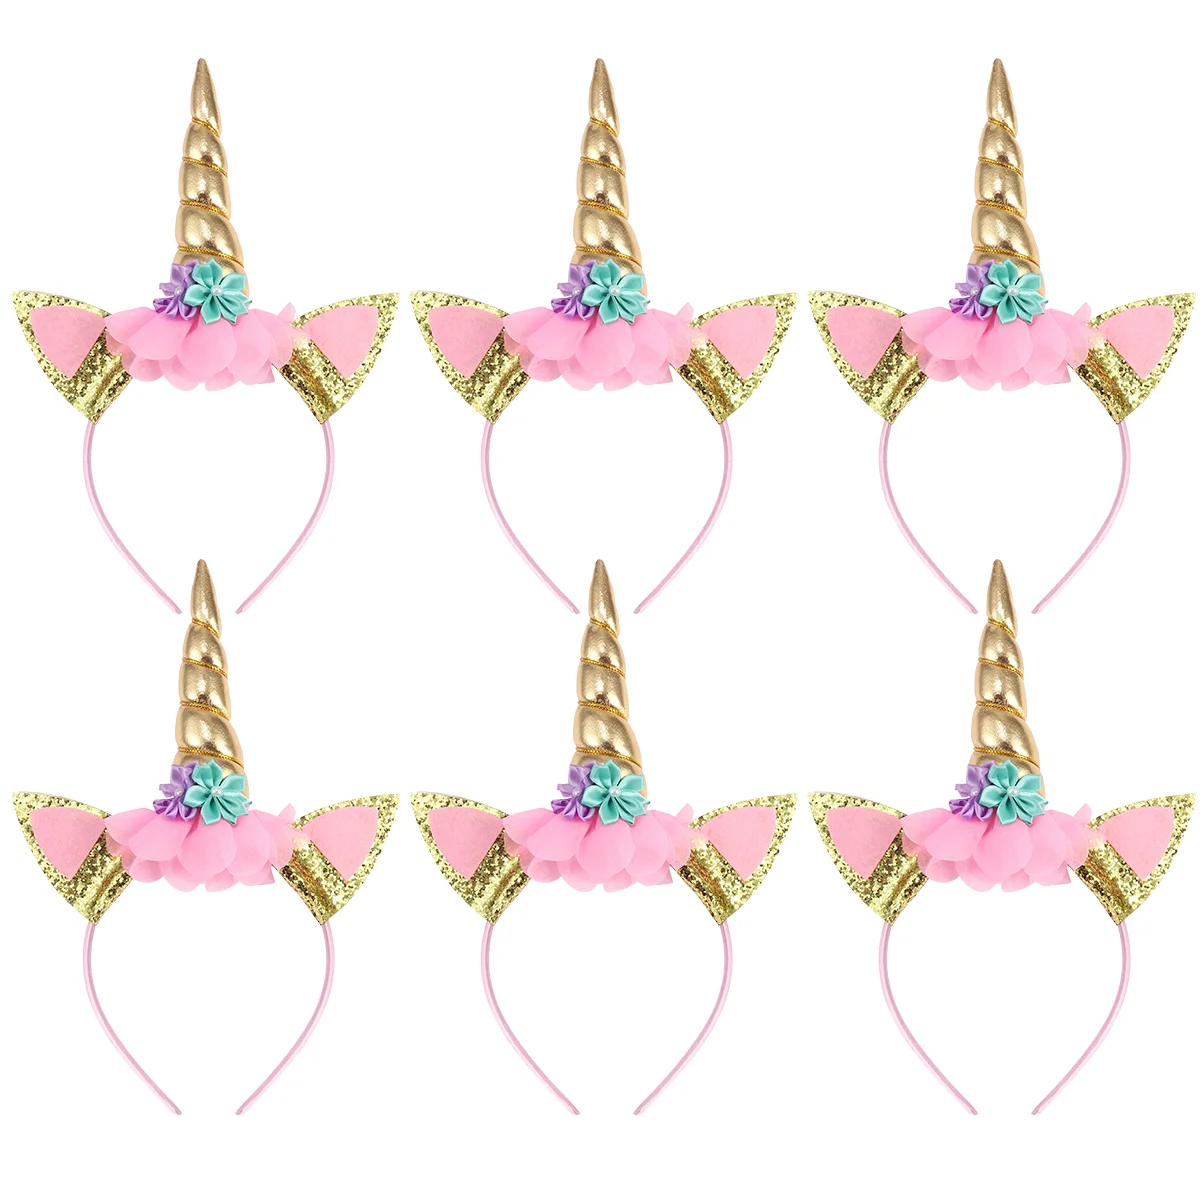 

TOYMYTOY 6PCS Unicorn Headband Gold Horn Headbands Perfect Unicorn Party Supplies Party Favor for Birthday or Decorations kids